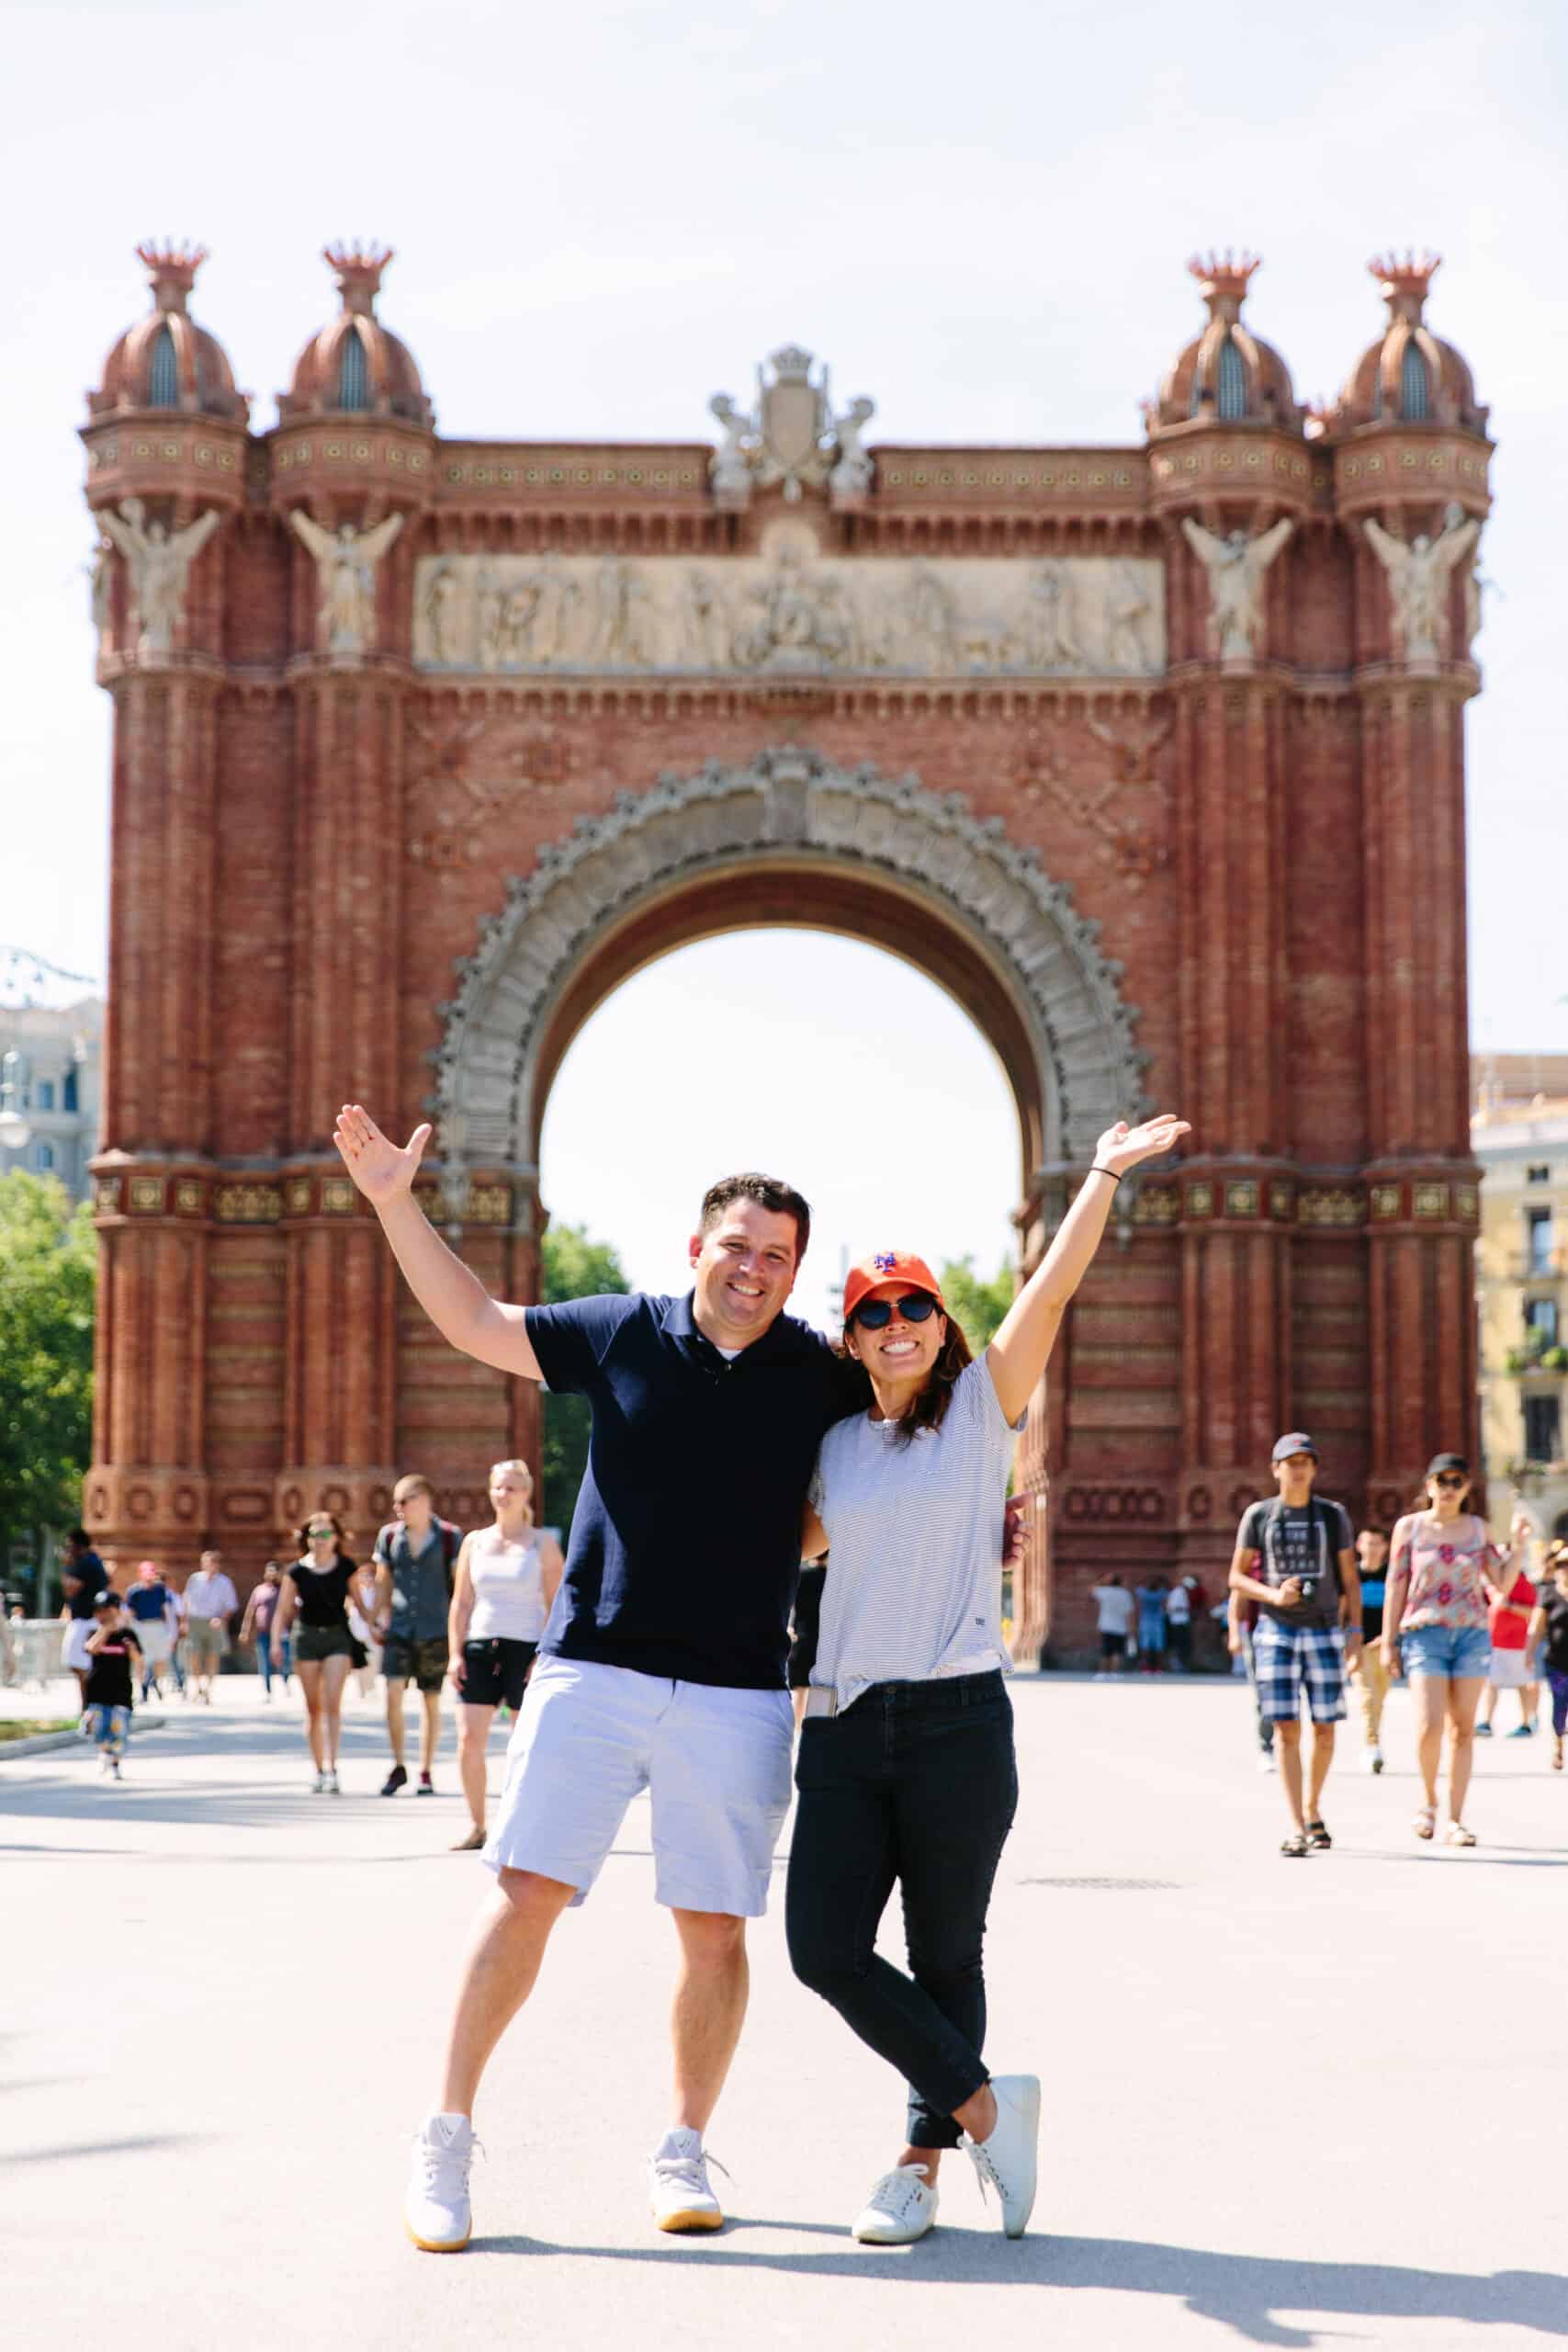 A couple poses for a photo in front of the Arc de Triomf in Barcelona, Spain